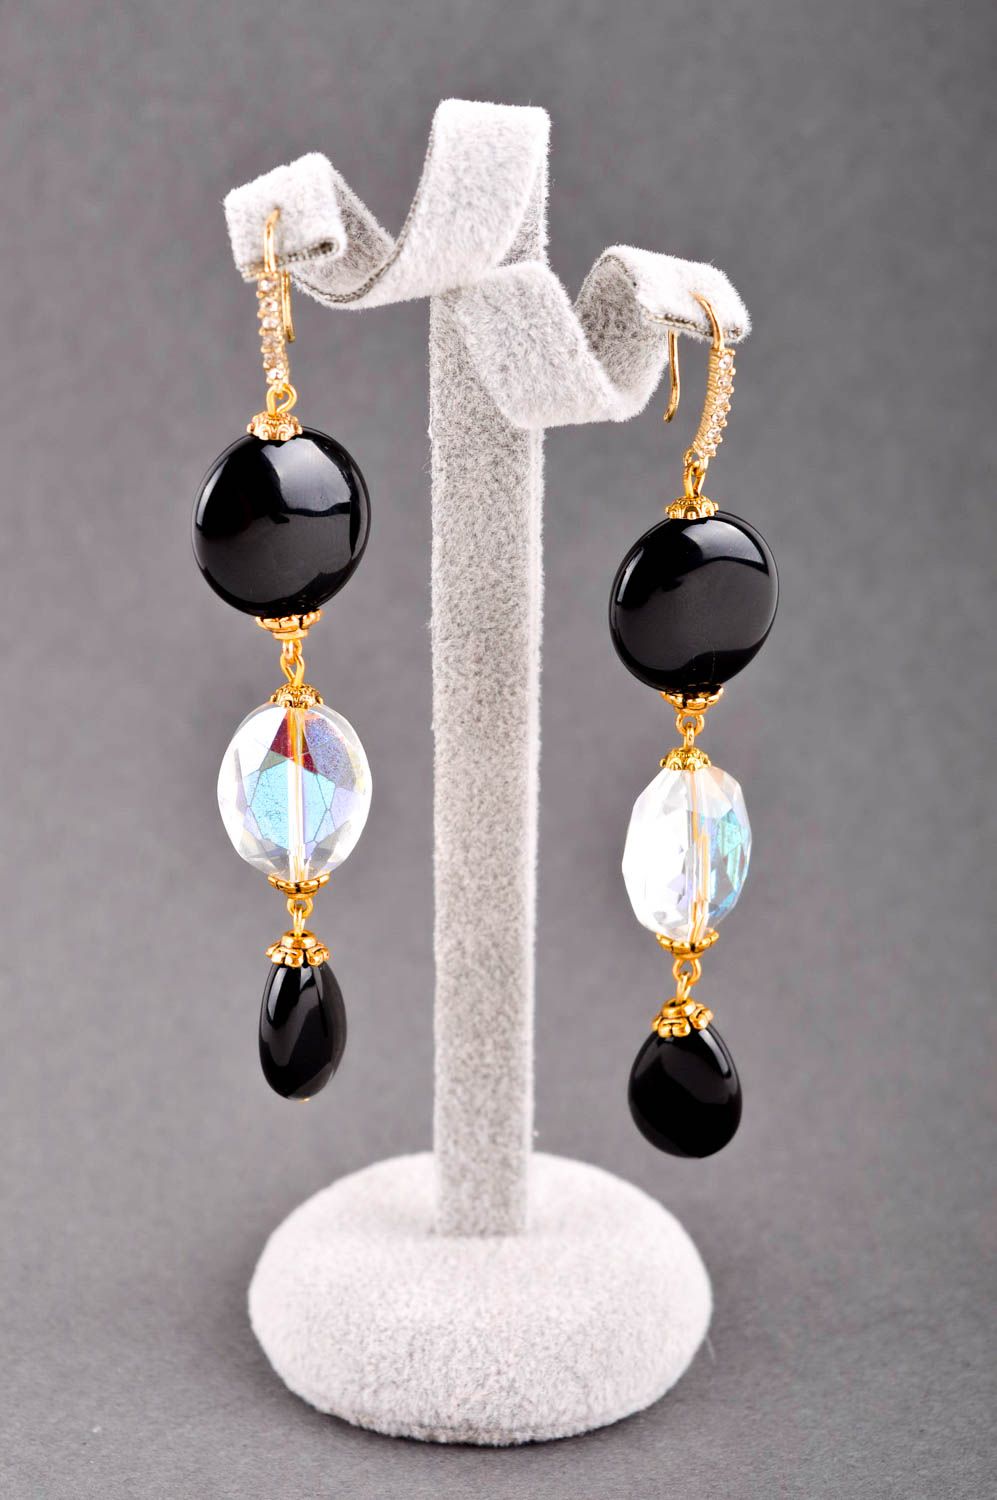 Handmade earrings with charms evening jewelry with natural stones for women photo 1